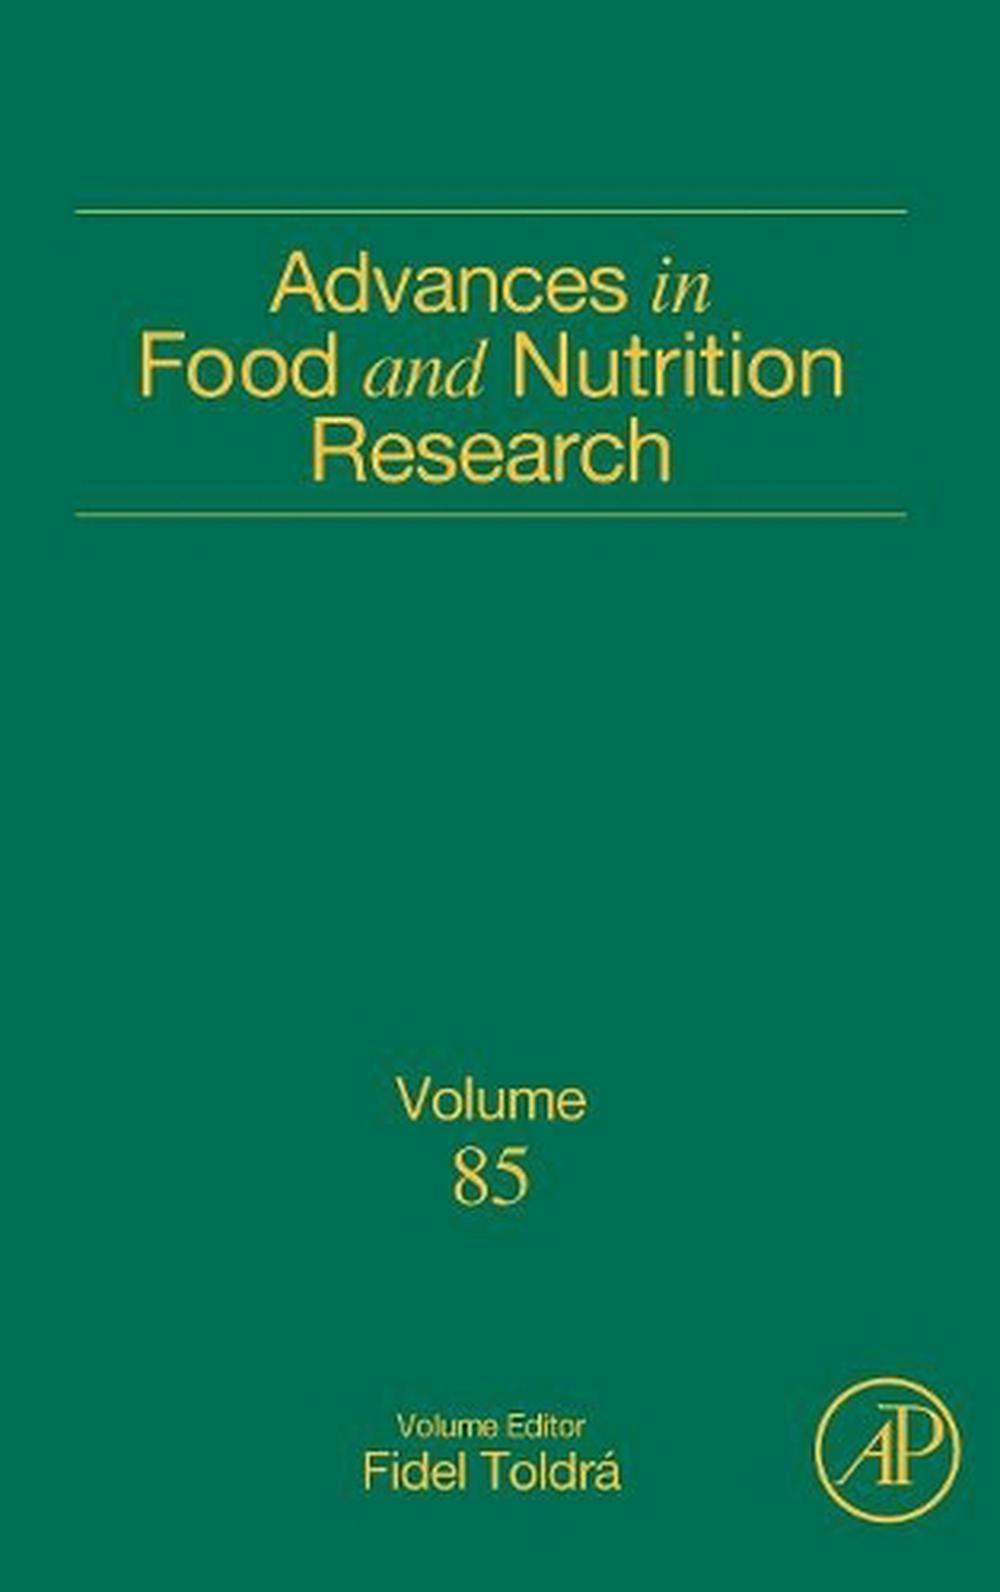 research on food and nutrition